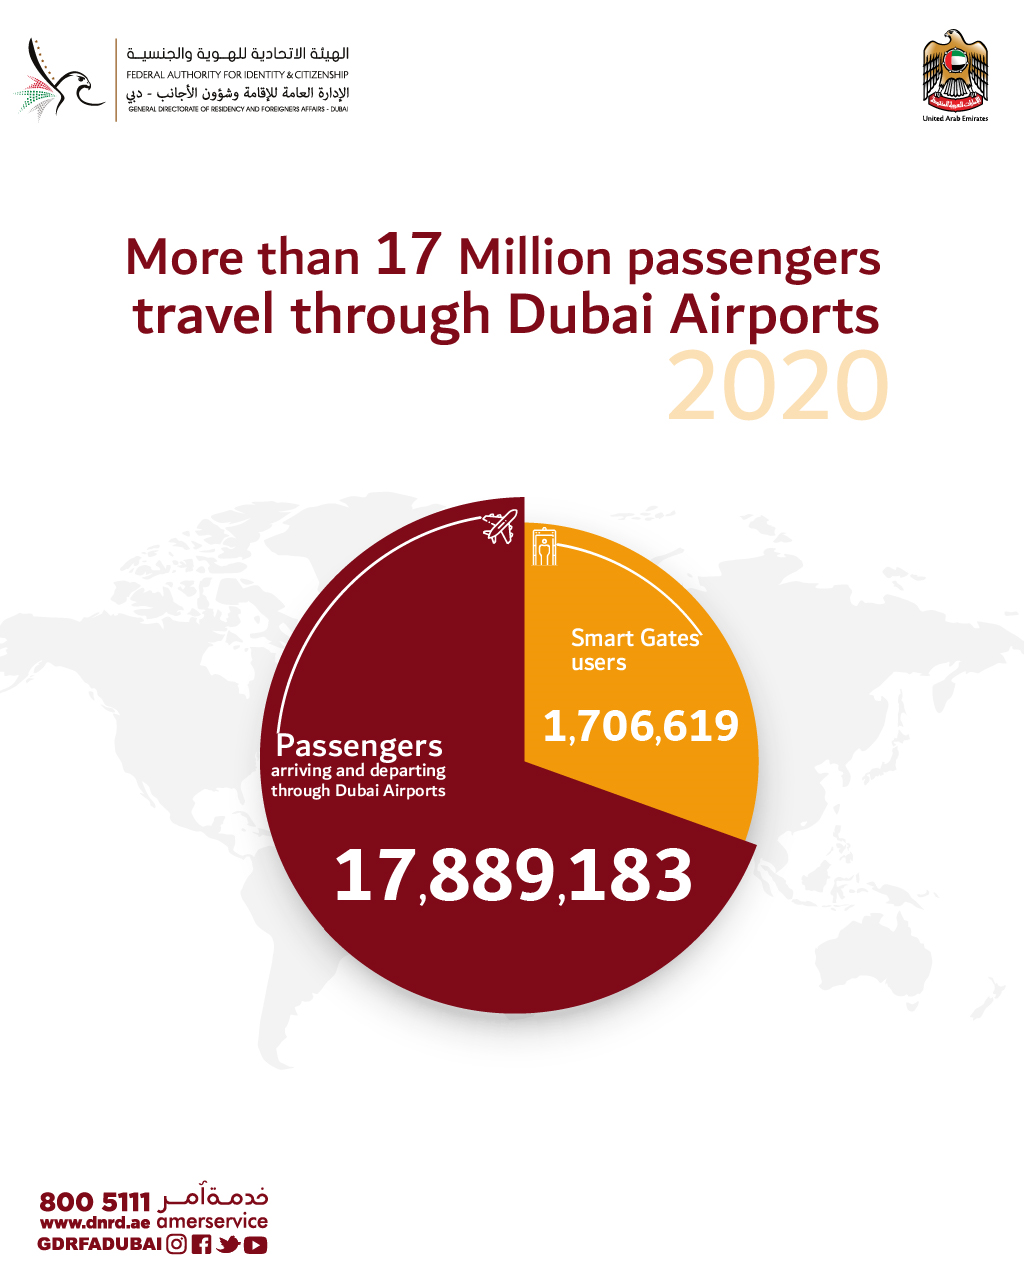 about-18-million-passengers-travel-though-dubai-airports-in-2020